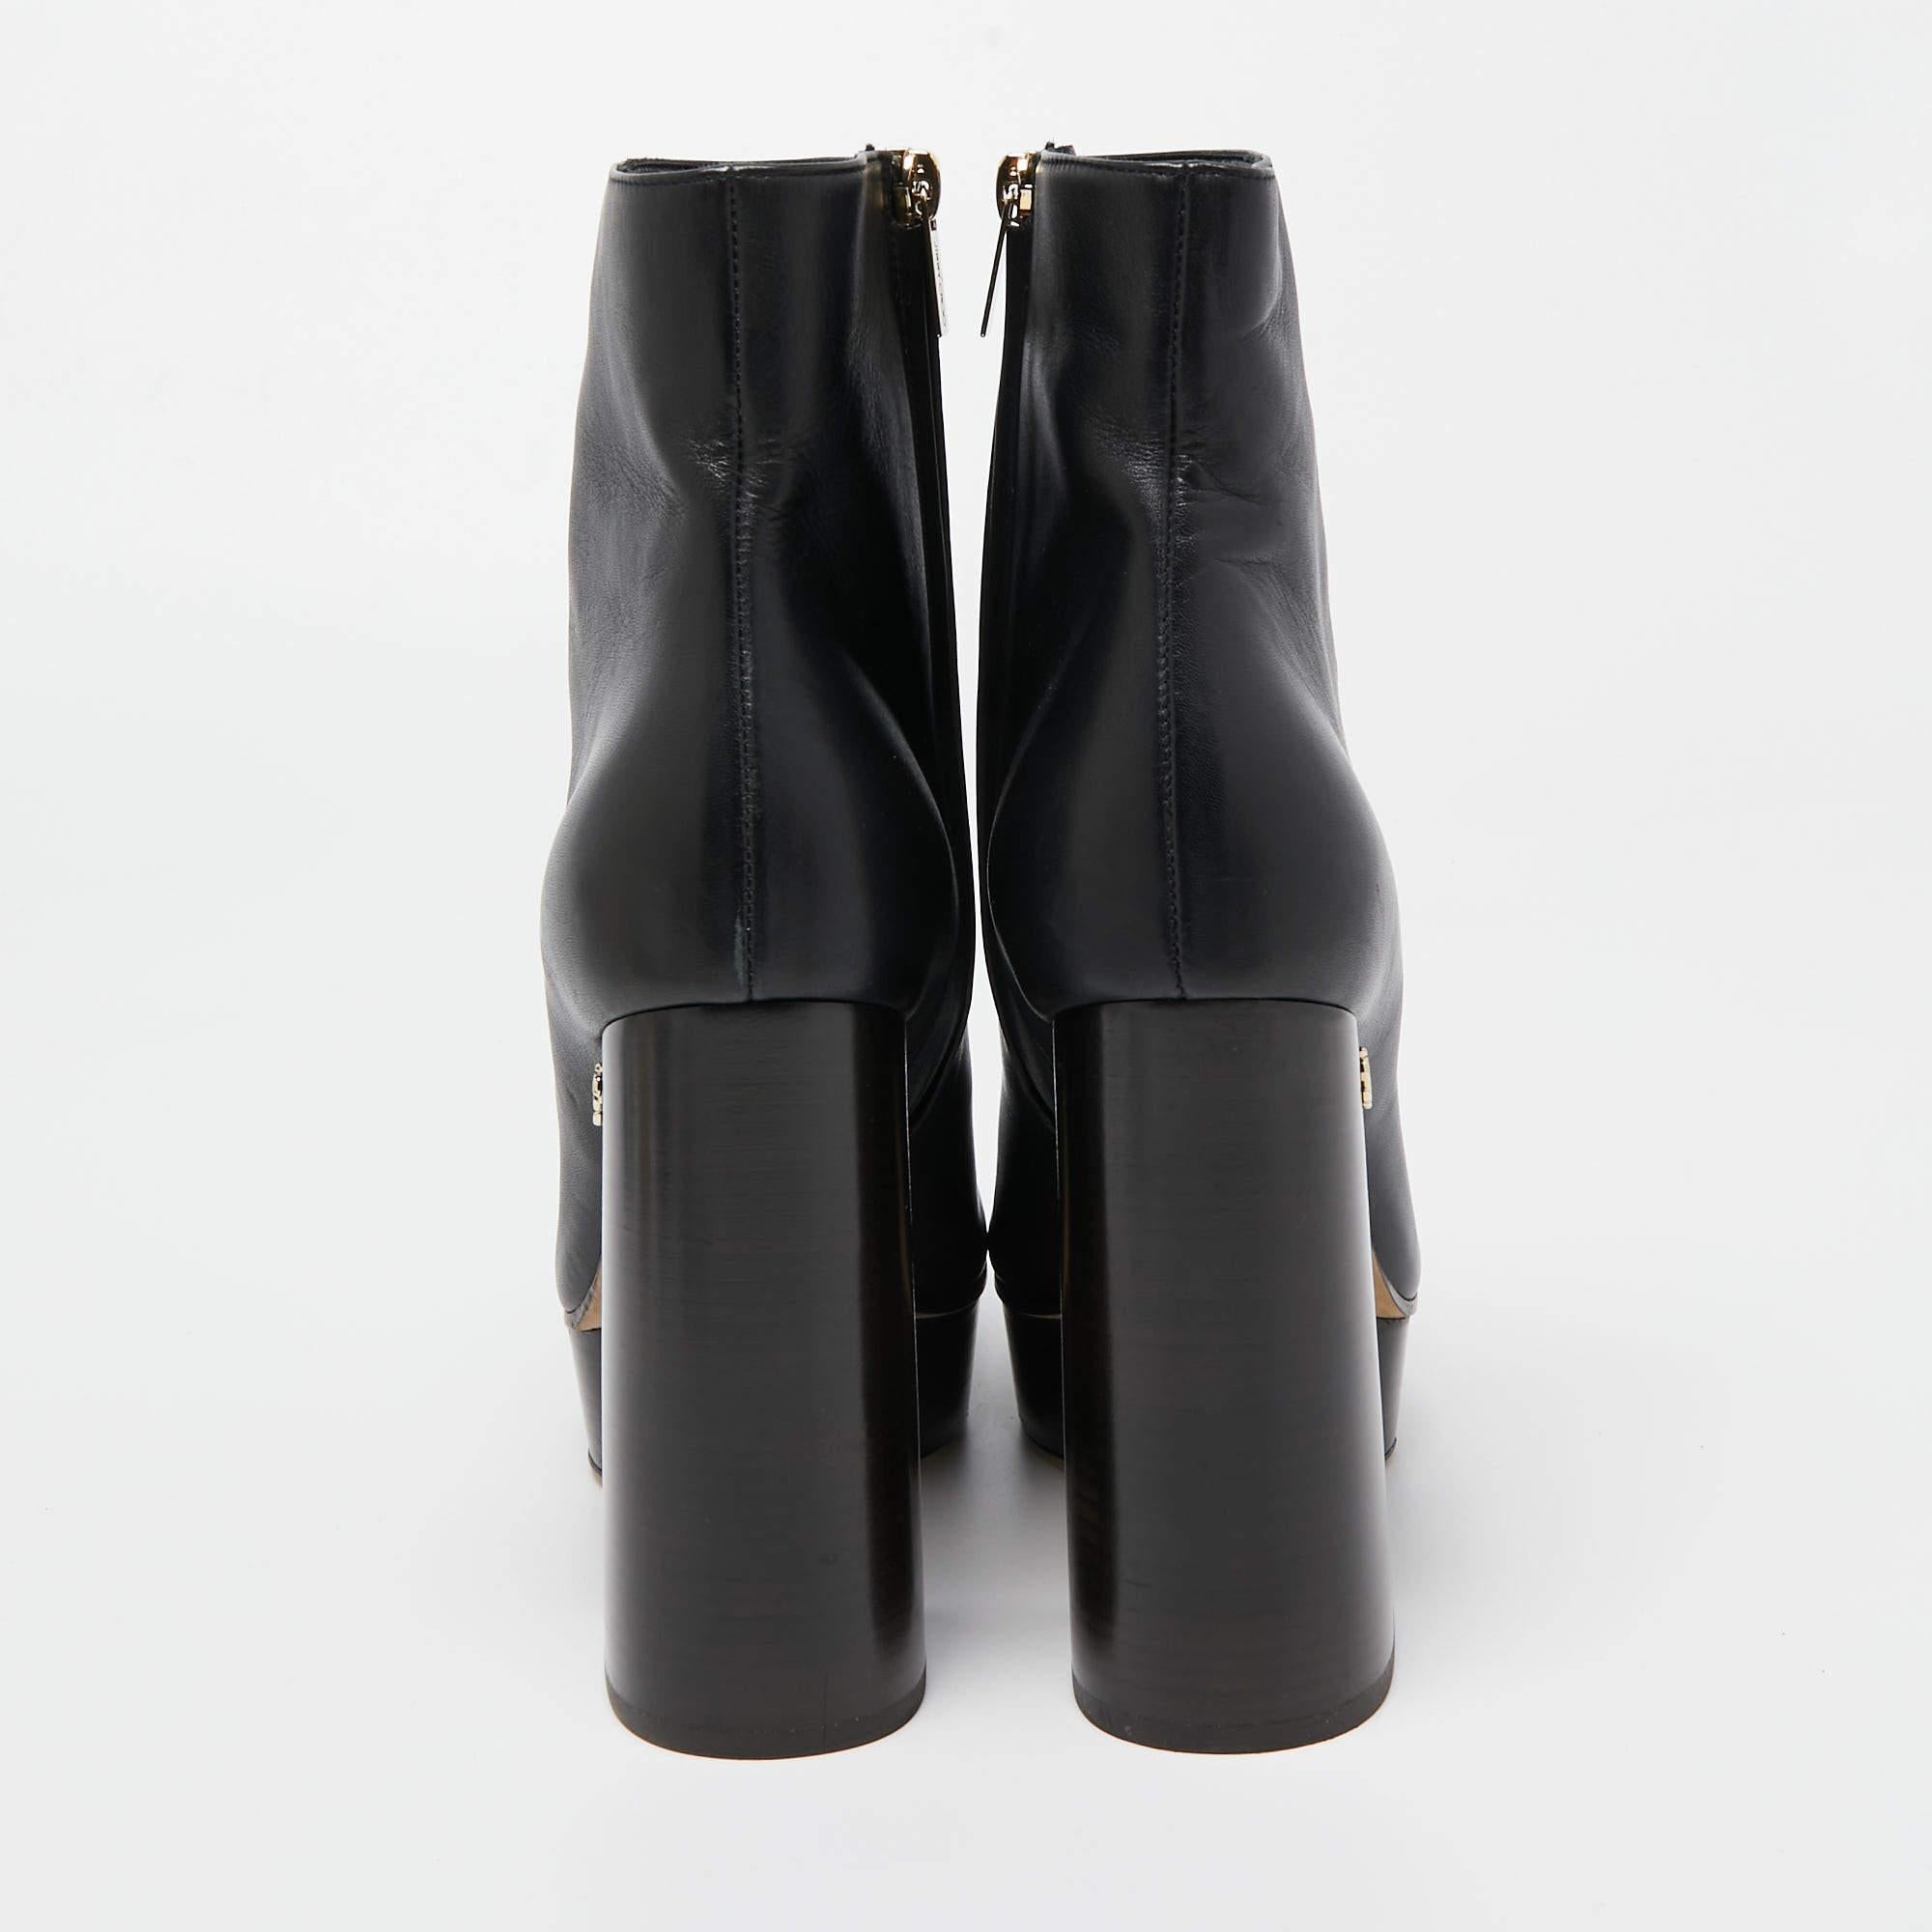 Jimmy Choo Black Leather Bryn Ankle Boots Size 39.5 In Good Condition For Sale In Dubai, Al Qouz 2